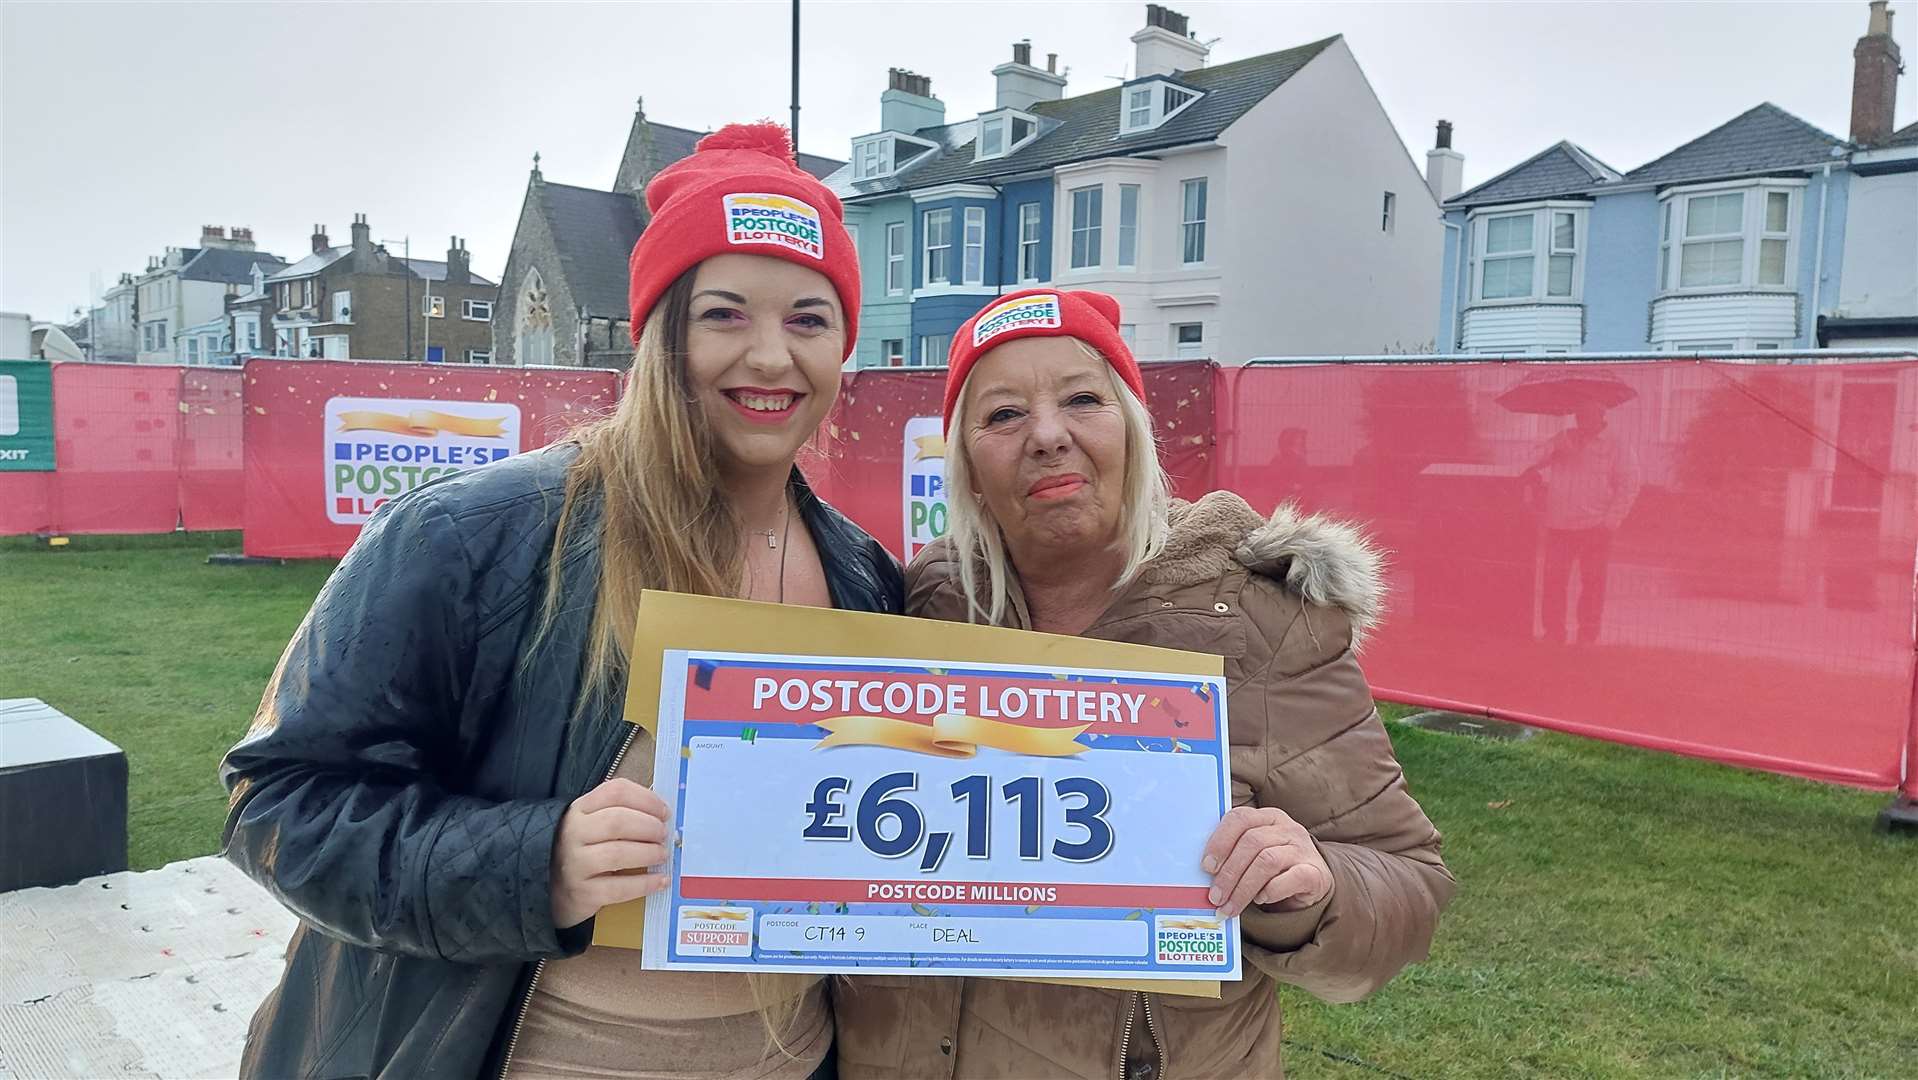 Mother and daughter Deborah and Georgia Brown want to put their winnings towards a holiday